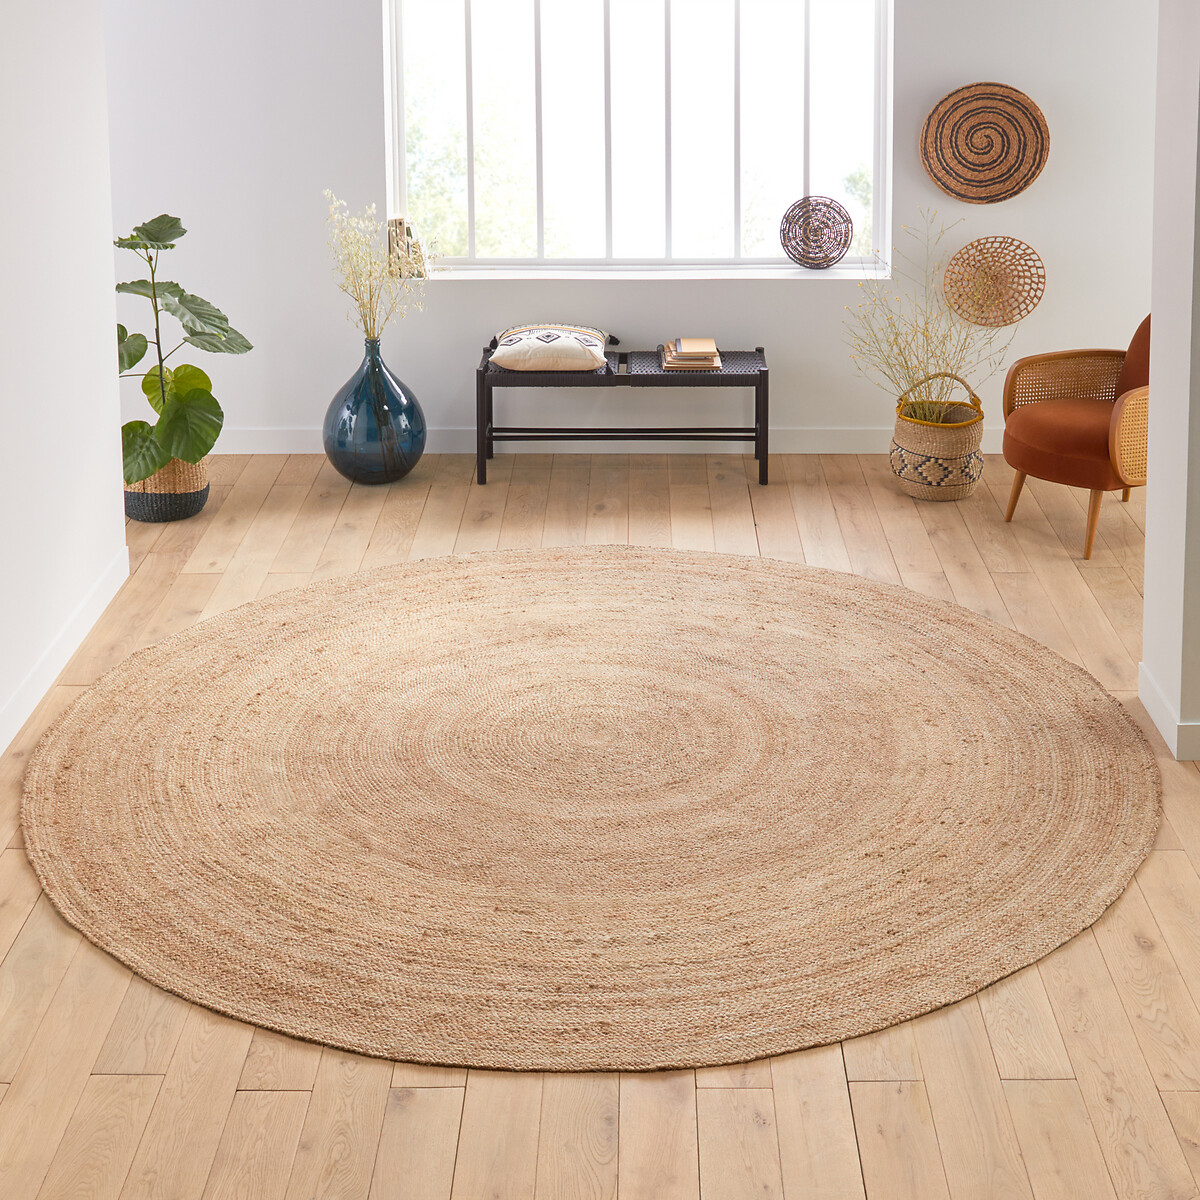 Aftas Round Jute Rug Natural Beige La, Are Jute Rugs Safe For Cats